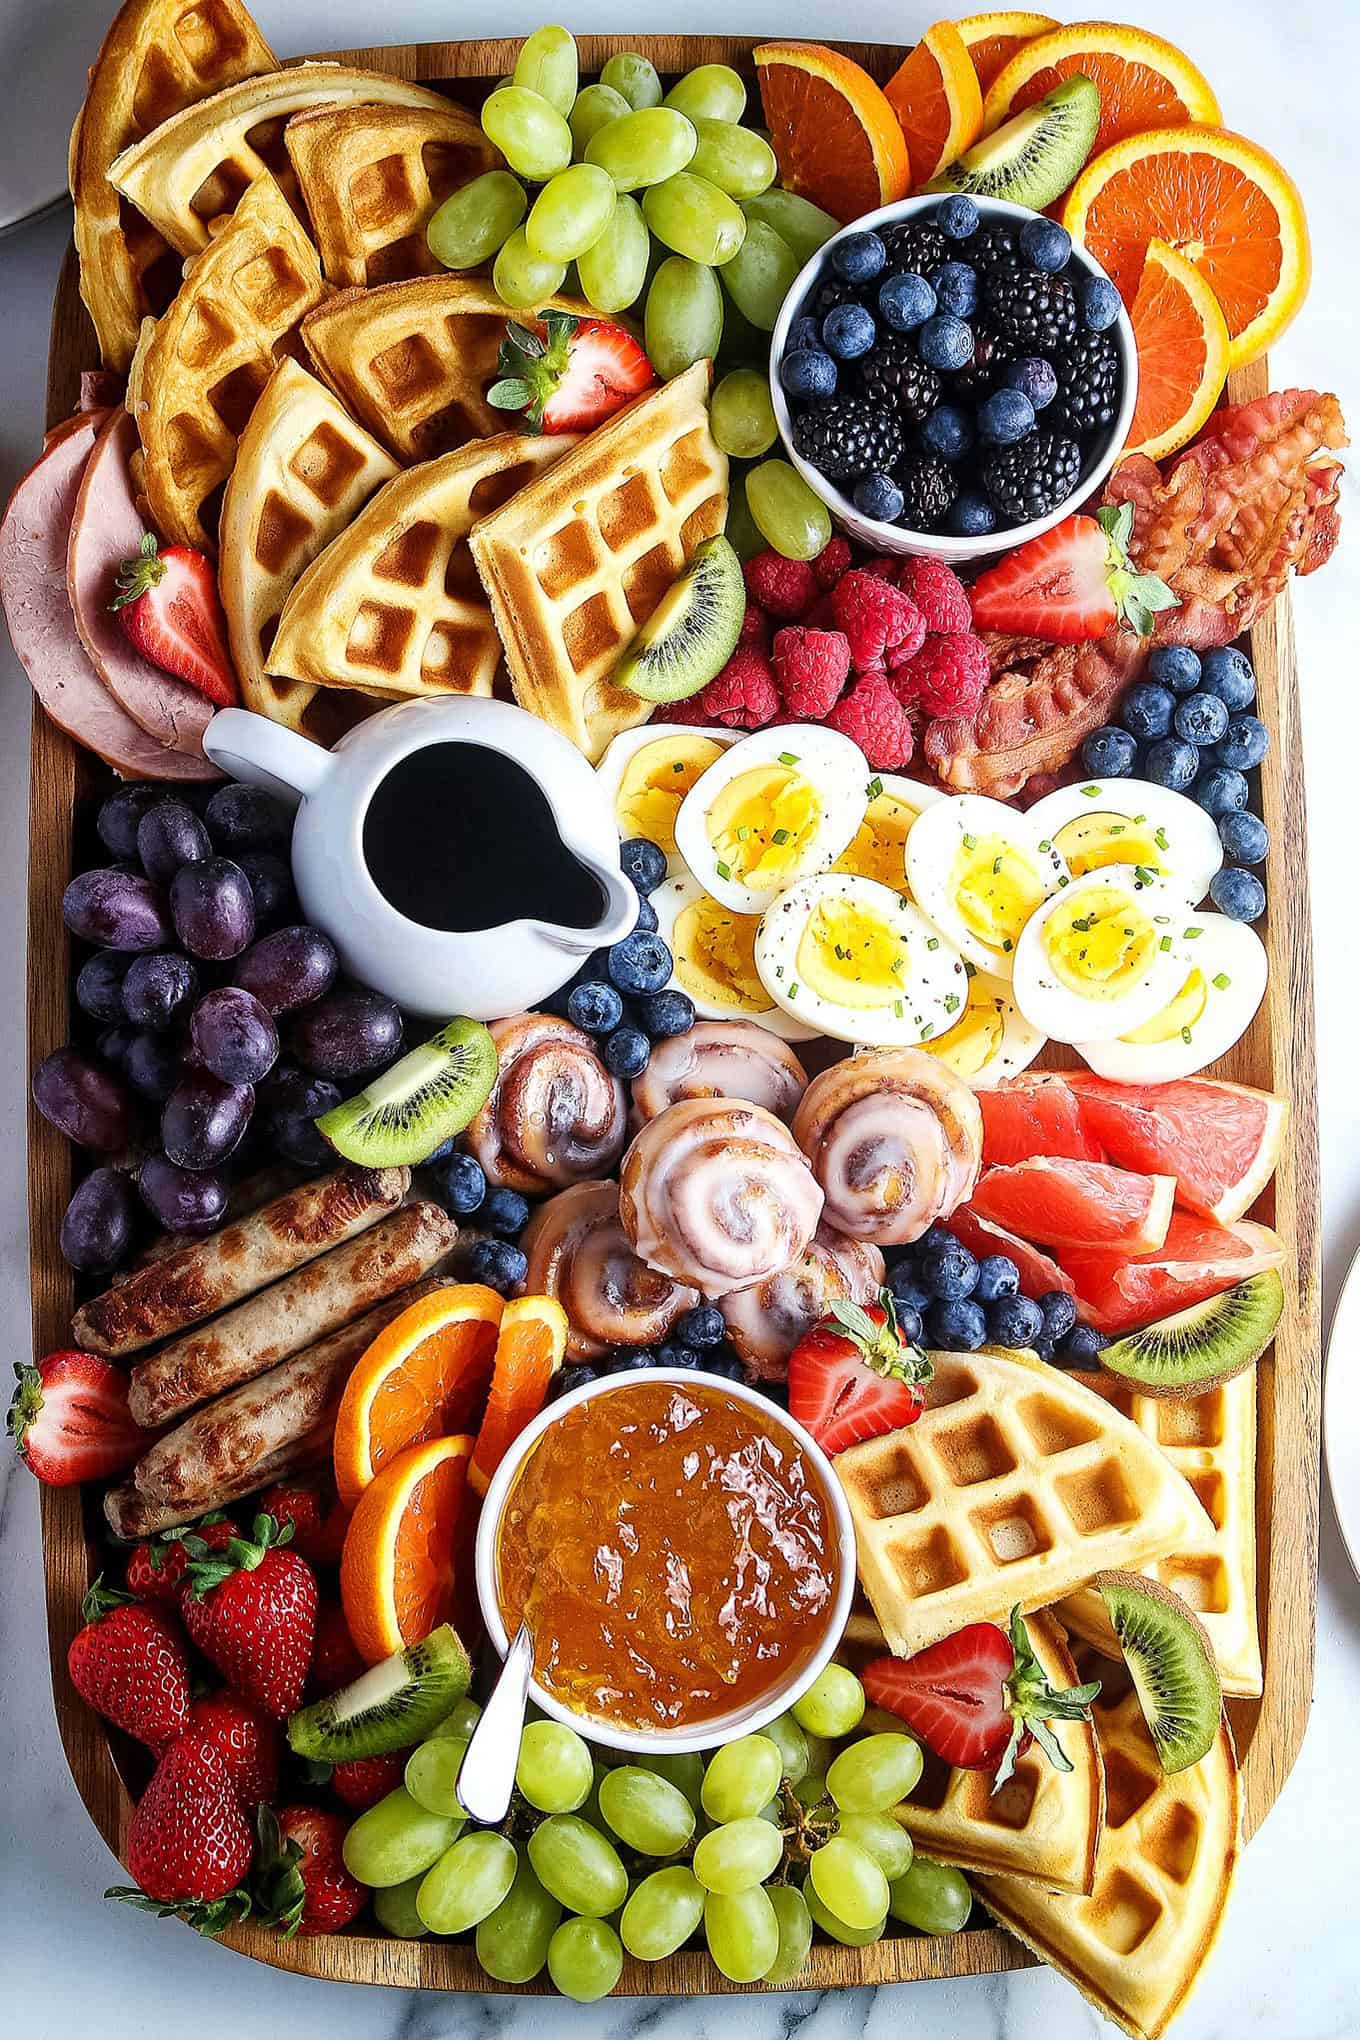 Easy Brunch and Breakfast Charcuterie Board Ideas » The Thirsty Feast